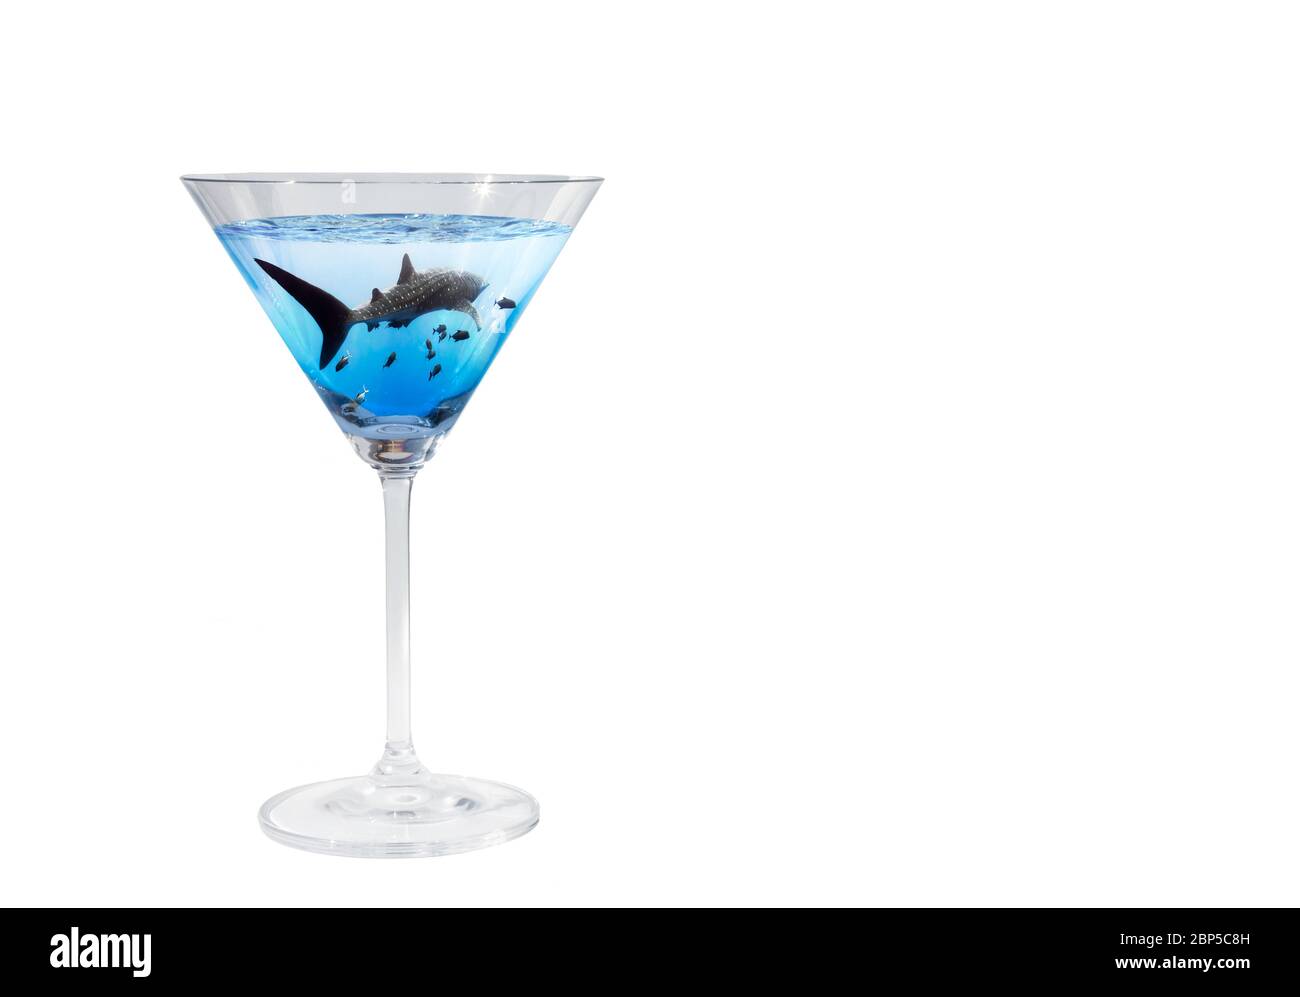 Sharktini: profile of whale shark (Rhincodon typus) swimming with black jacks (Caranx lugubris) in a martini glass on white background, Pacific Ocean Stock Photo